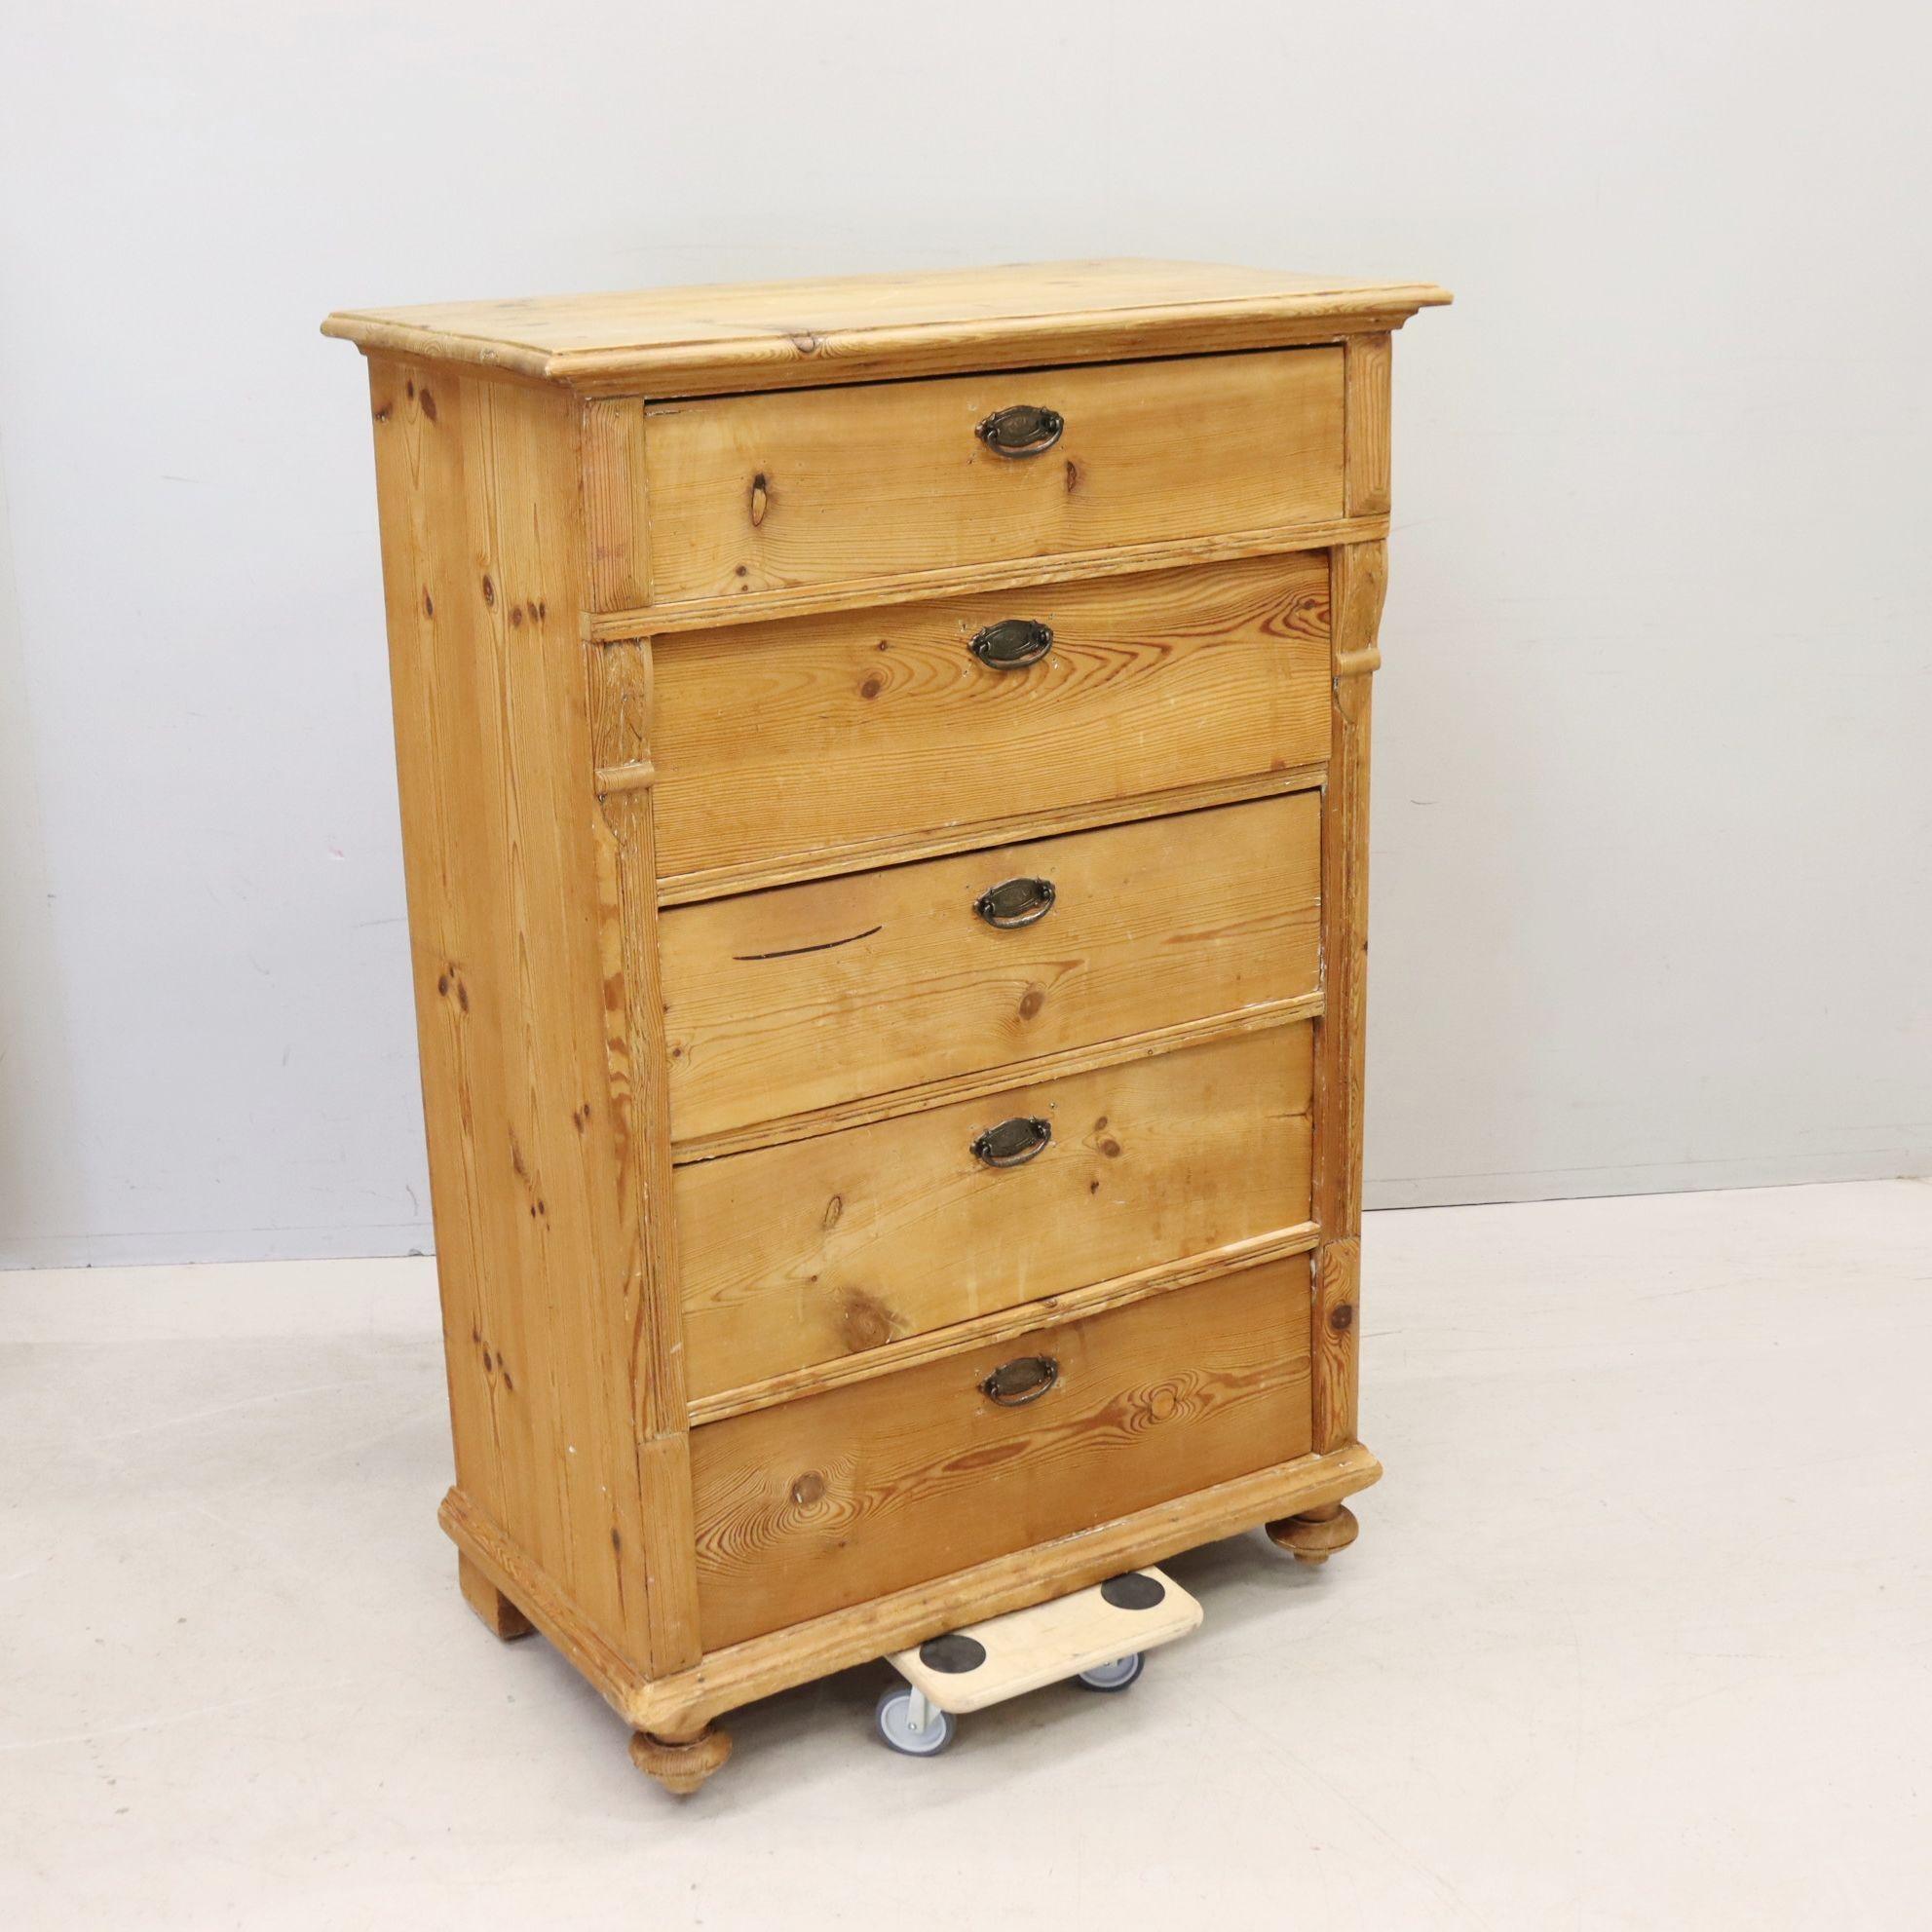 19th century Swedish unfinished pine tall chest of drawers. This antique dresser from the 1800s was crafted from rich Scandinavian pine and features five generous drawers and elegant bun feet along with its original brass drawer pulls. Beautiful